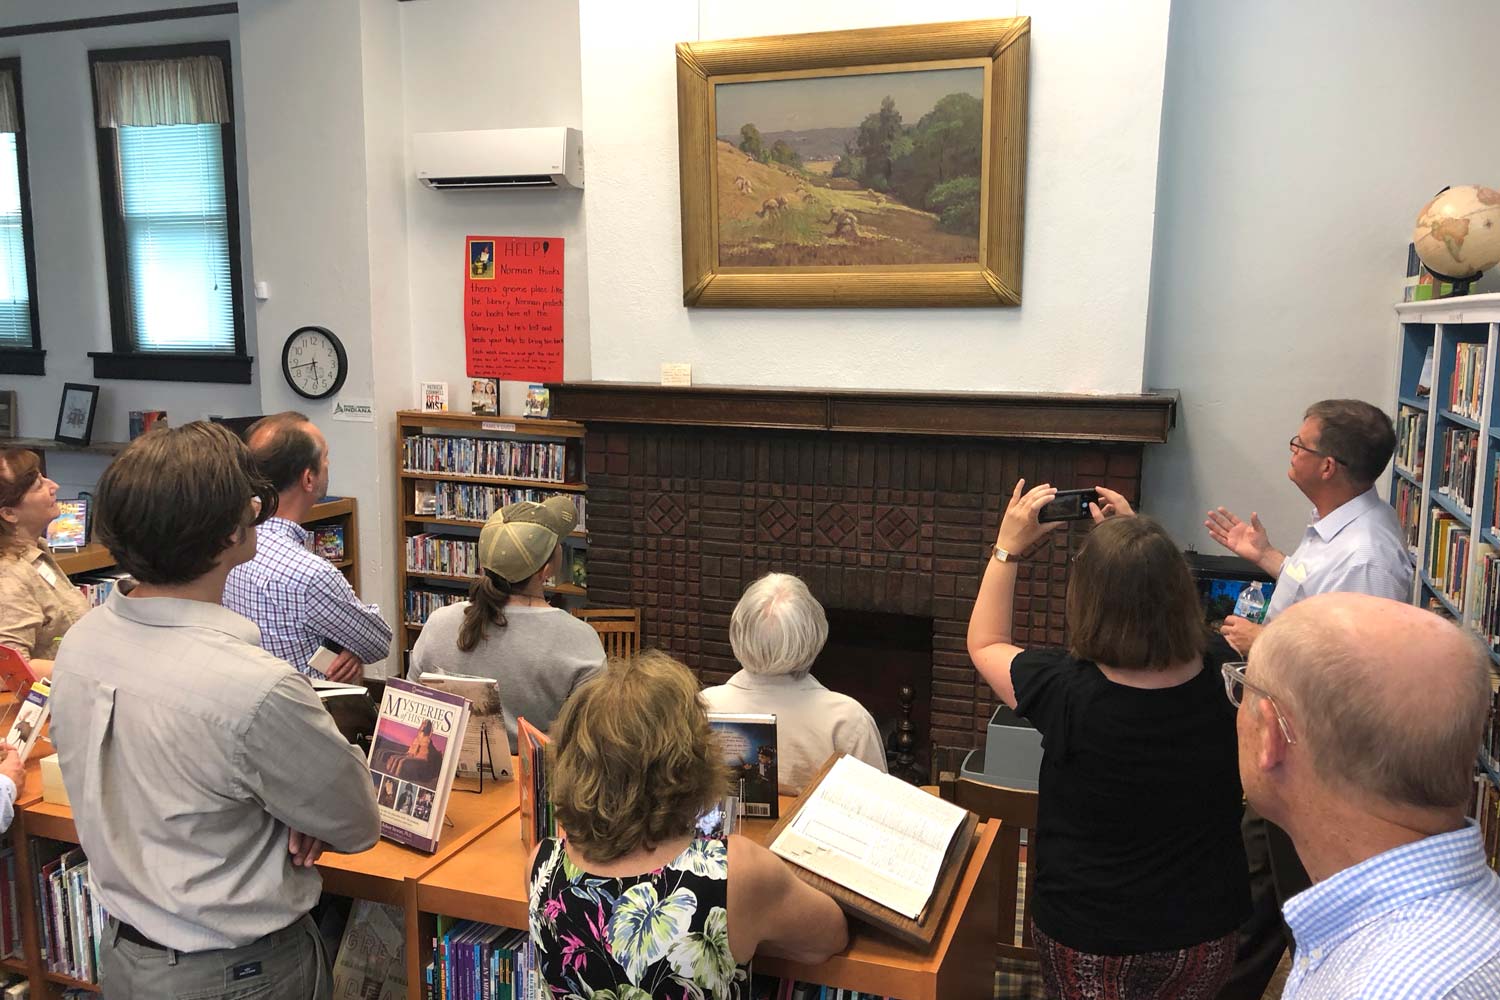 The Friends of T.C. Steele stand around the painting "In Harvest Time" discussing and taking photographs